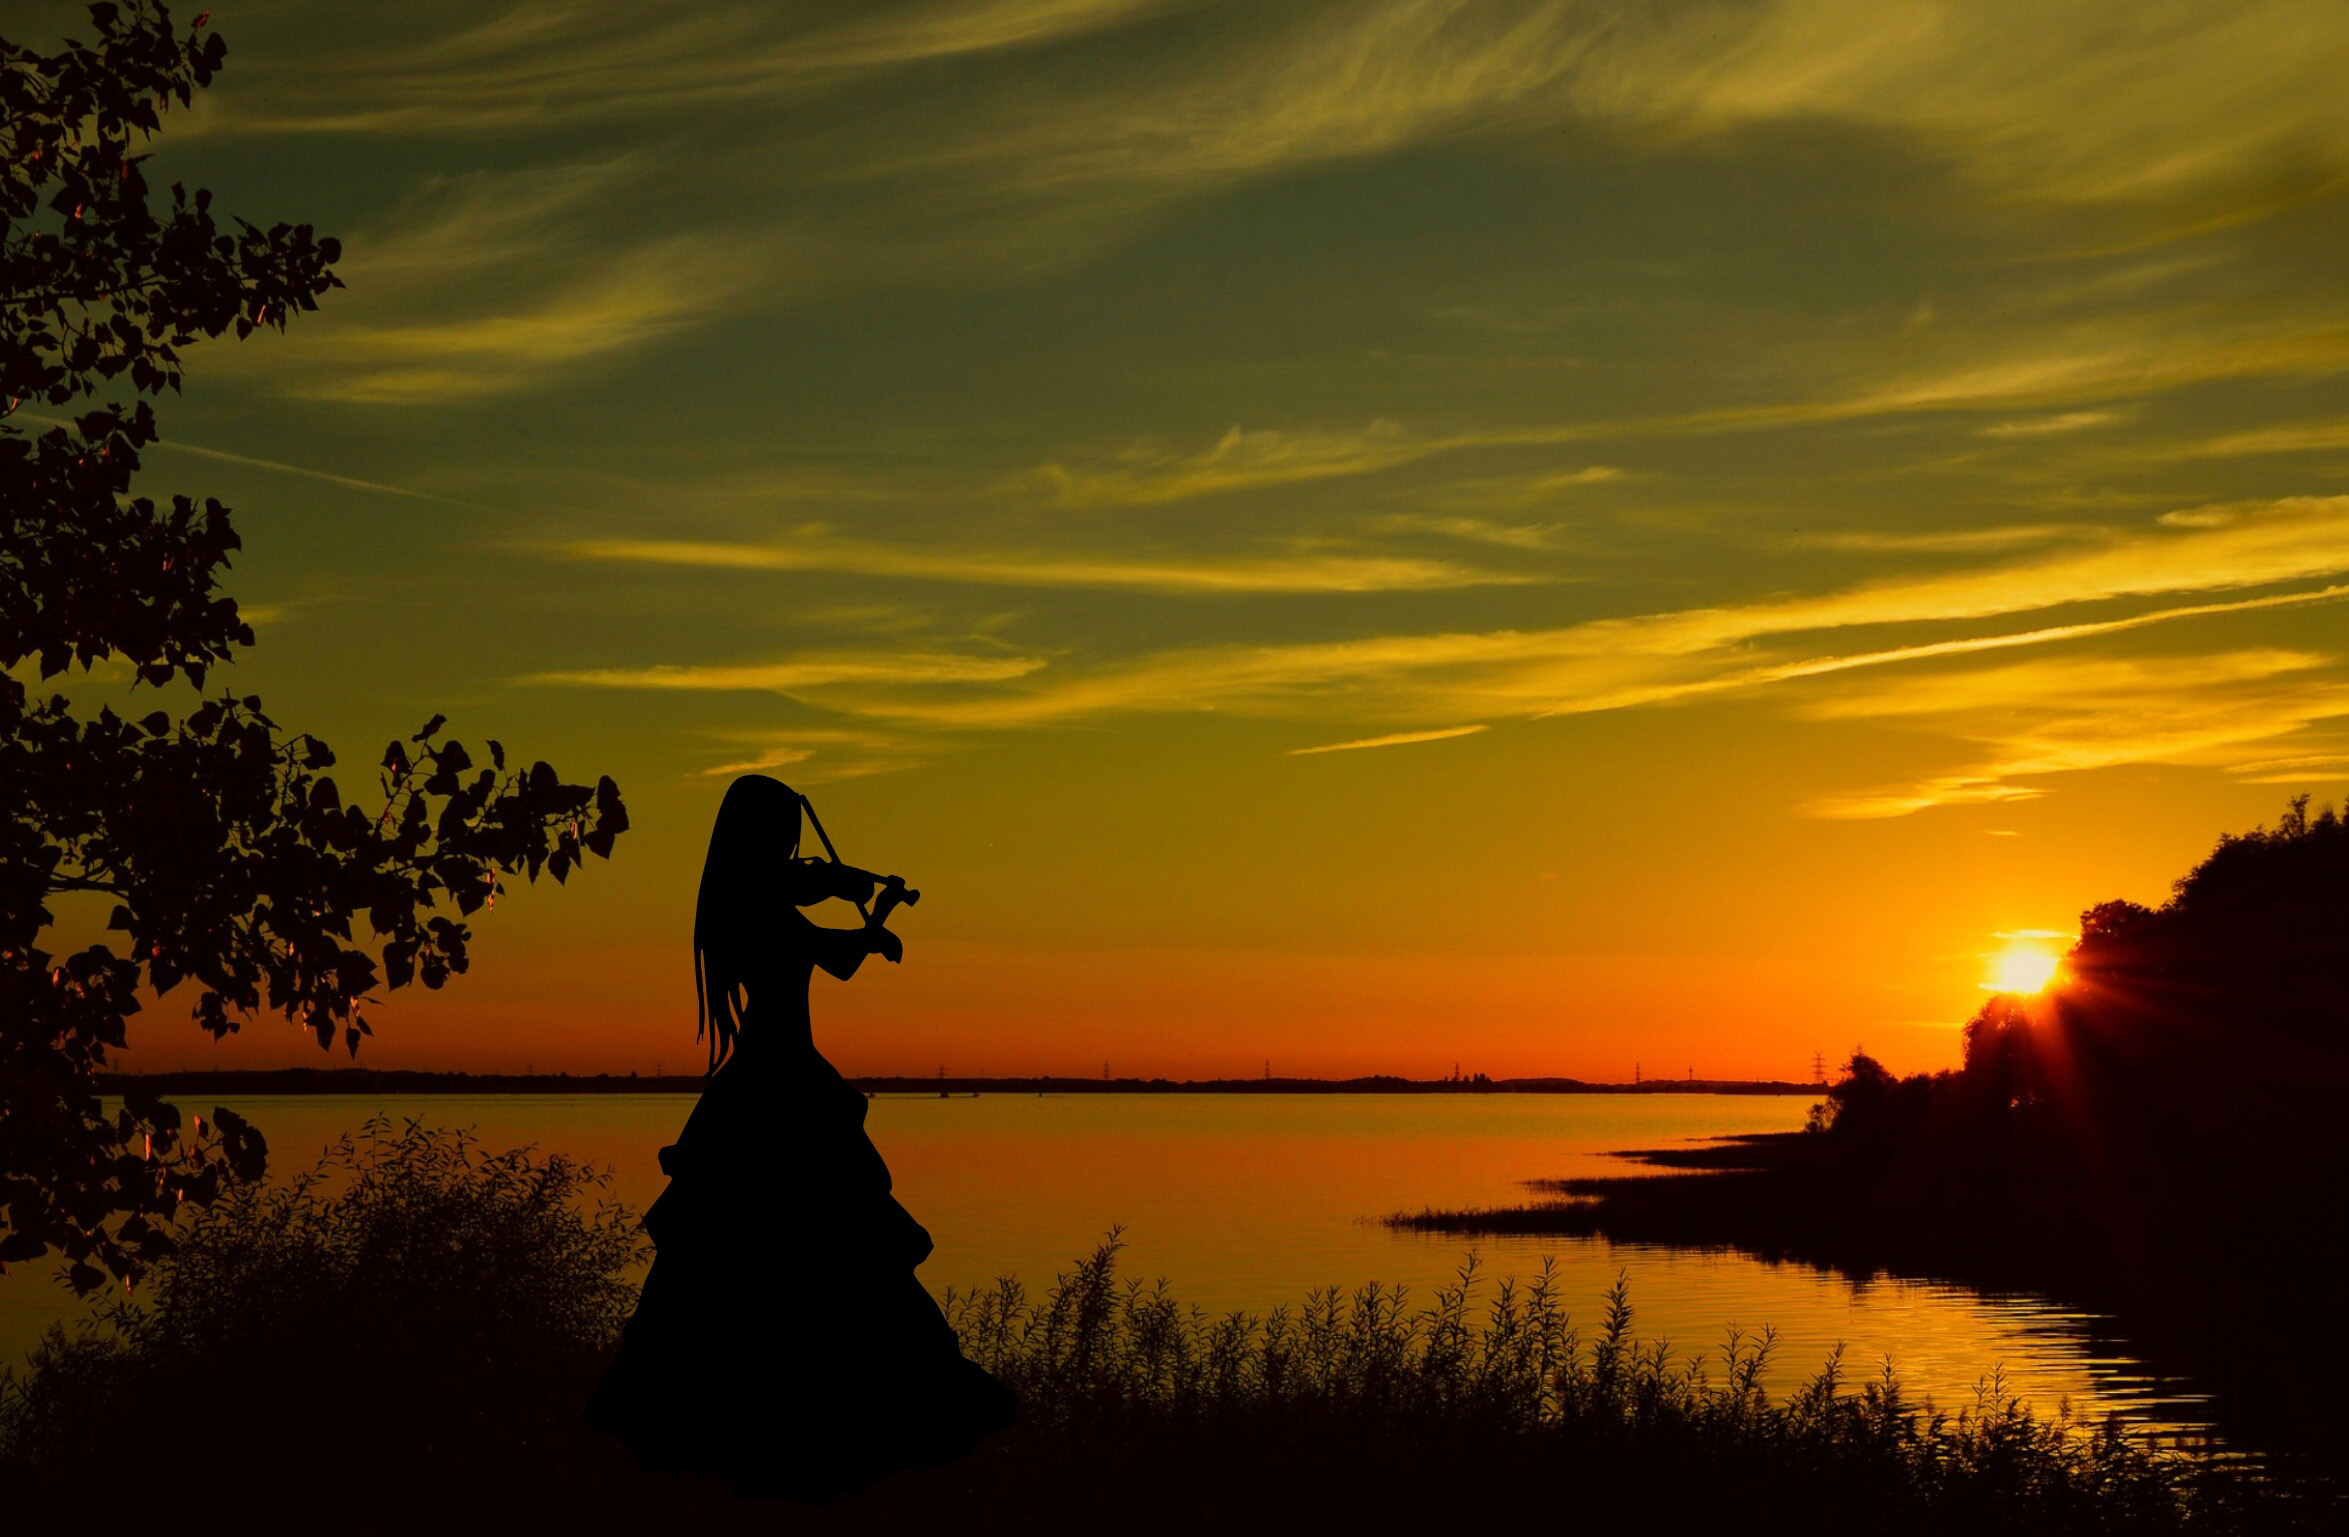 Violinist playing at sunset image - Free stock photo - Public Domain ...